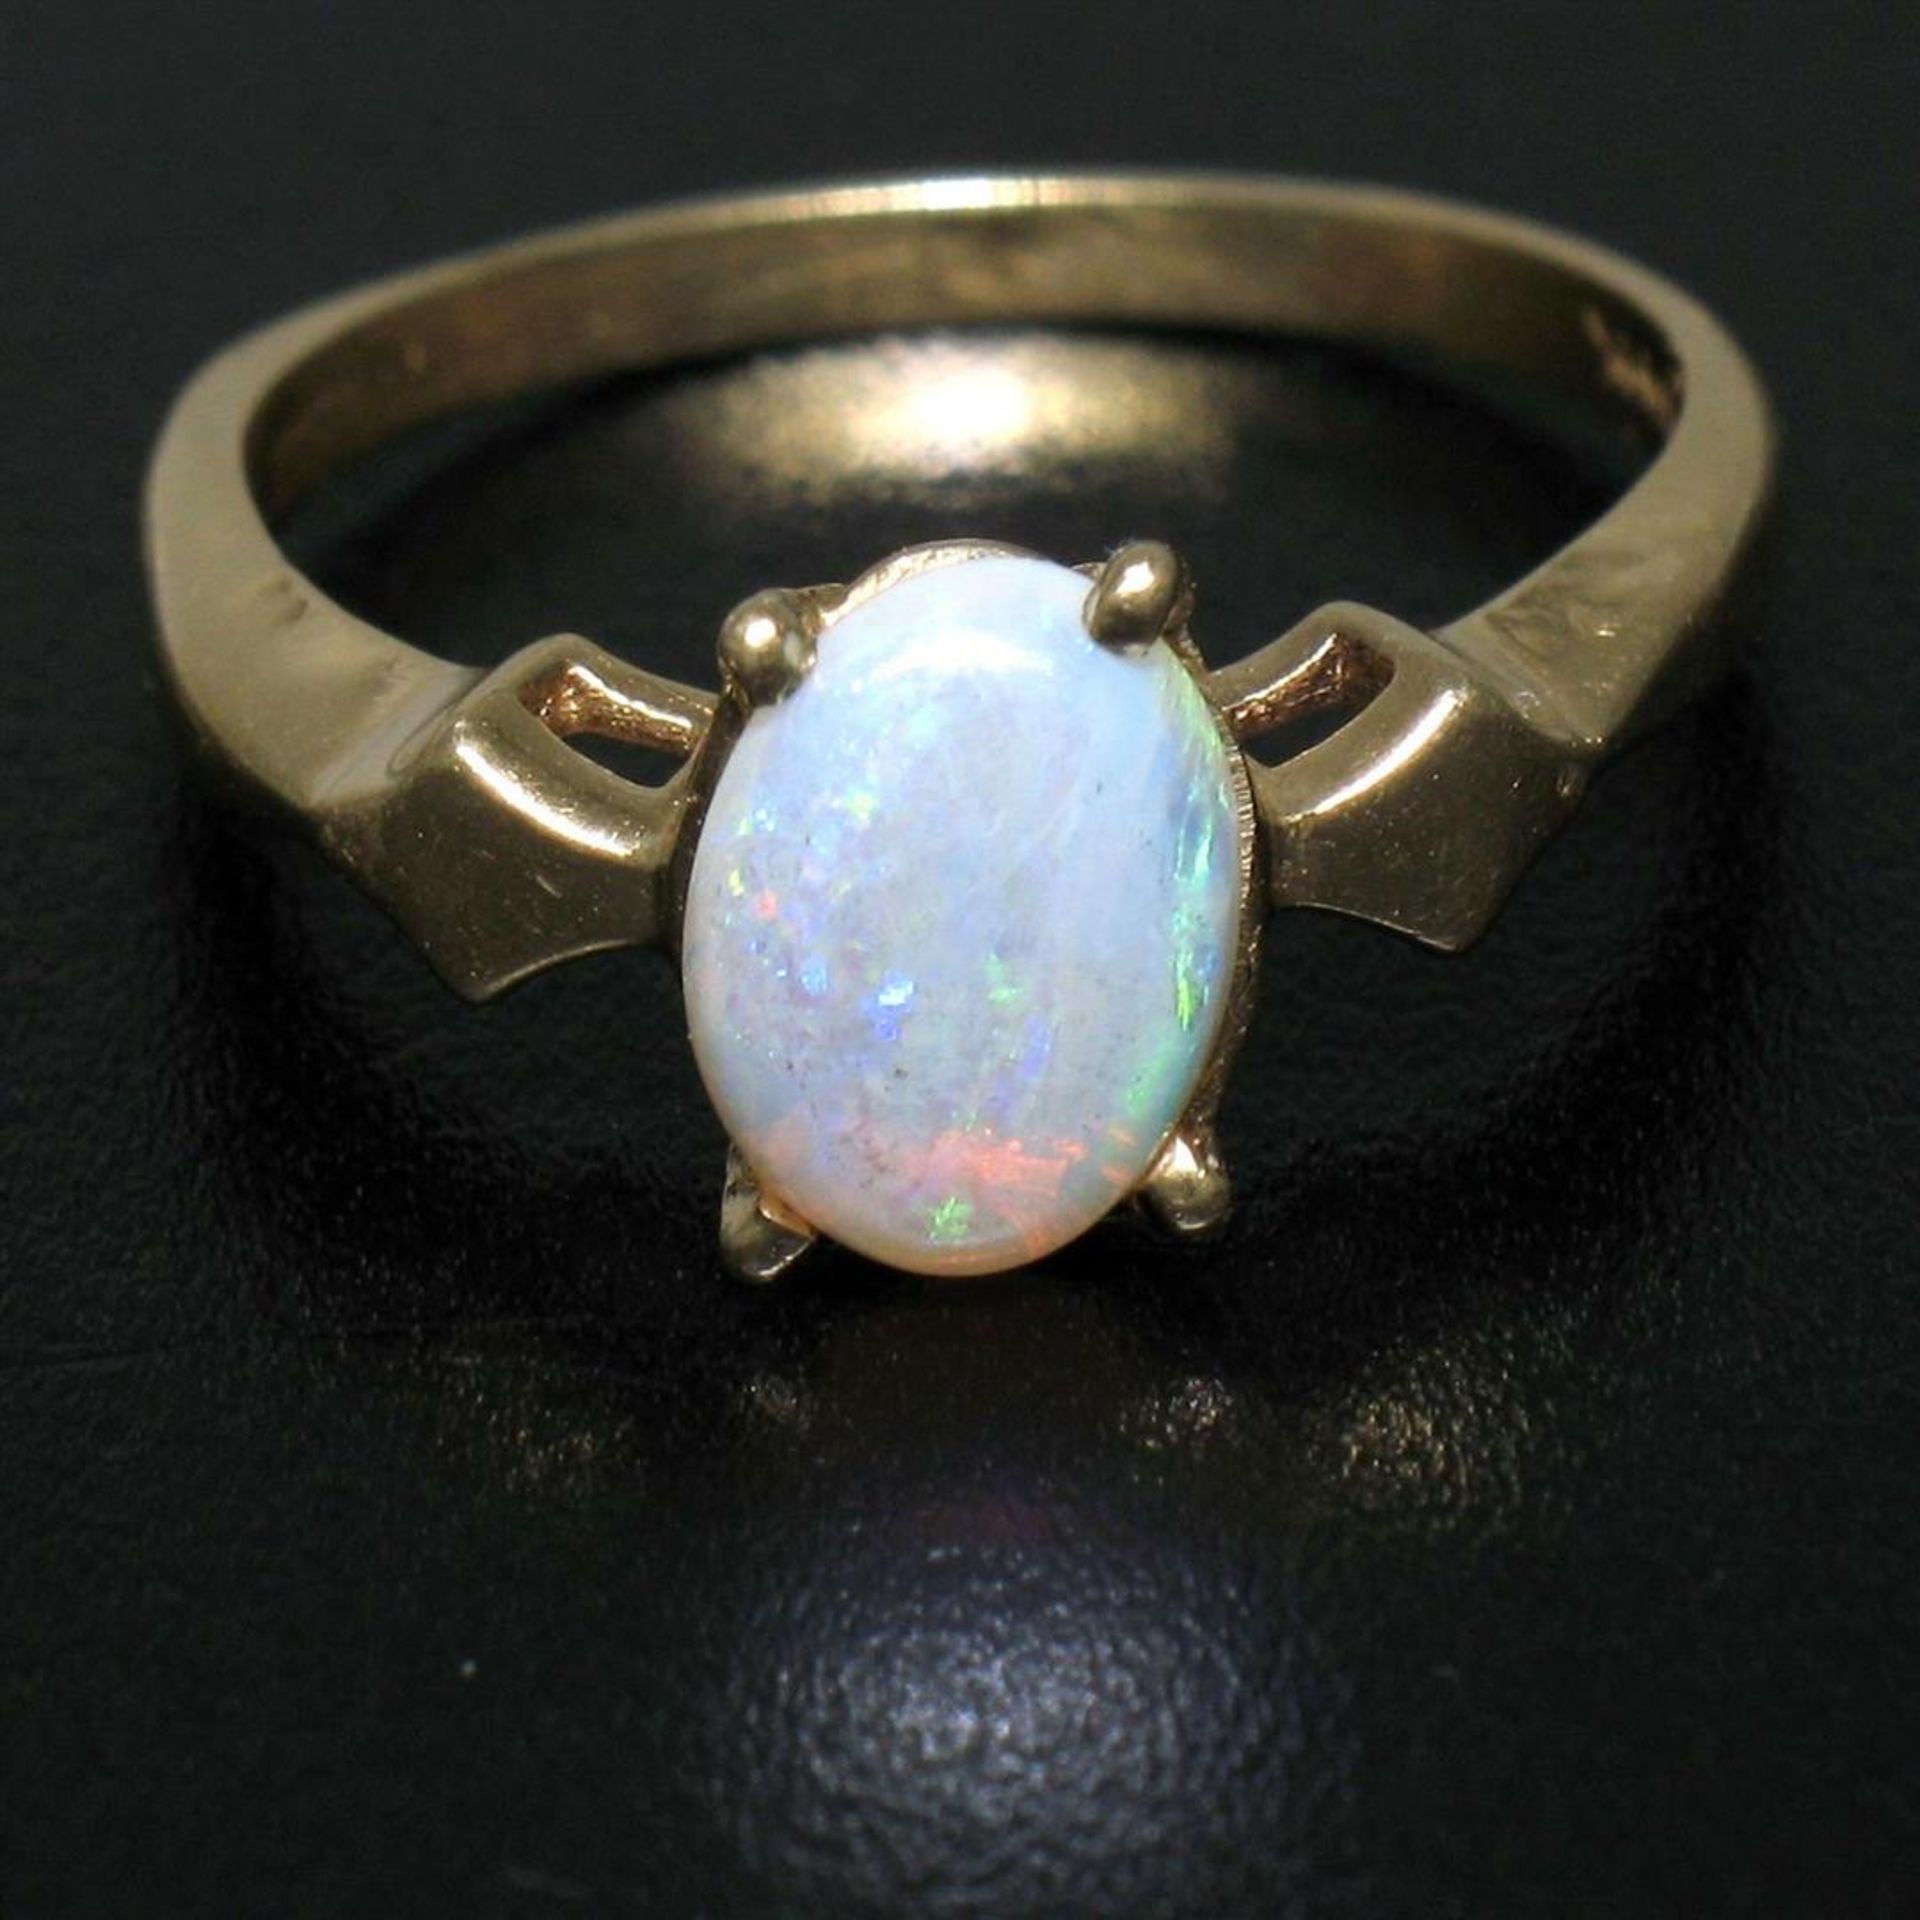 Vintage 14K Yellow Gold 0.65ct Petite Oval Cabochon Opal Solitaire Ring Size 6 - Image 7 of 9